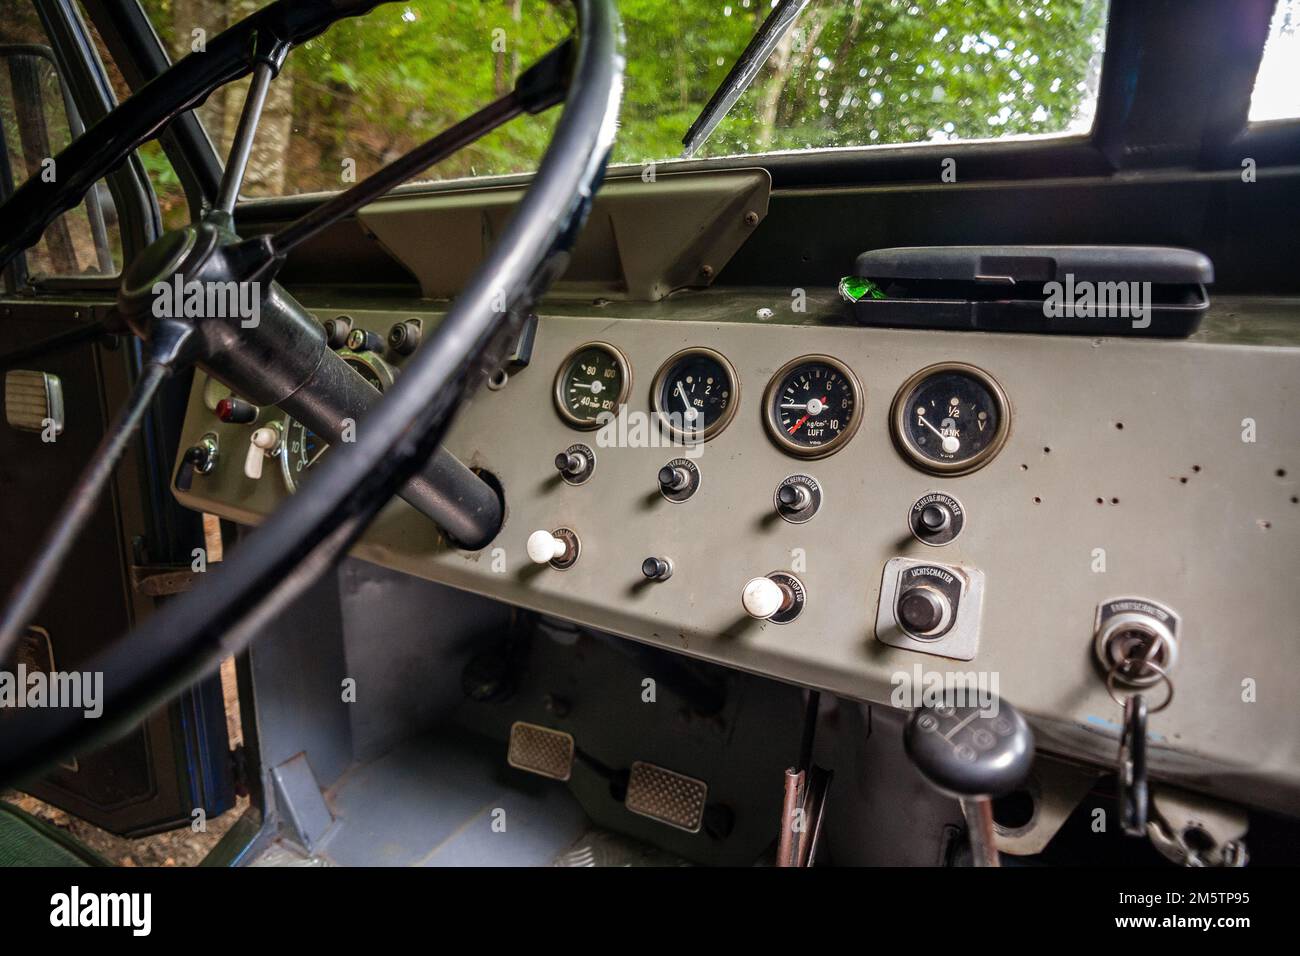 Closeup photo of a vintage Hanomag truck dashboard. Stock Photo